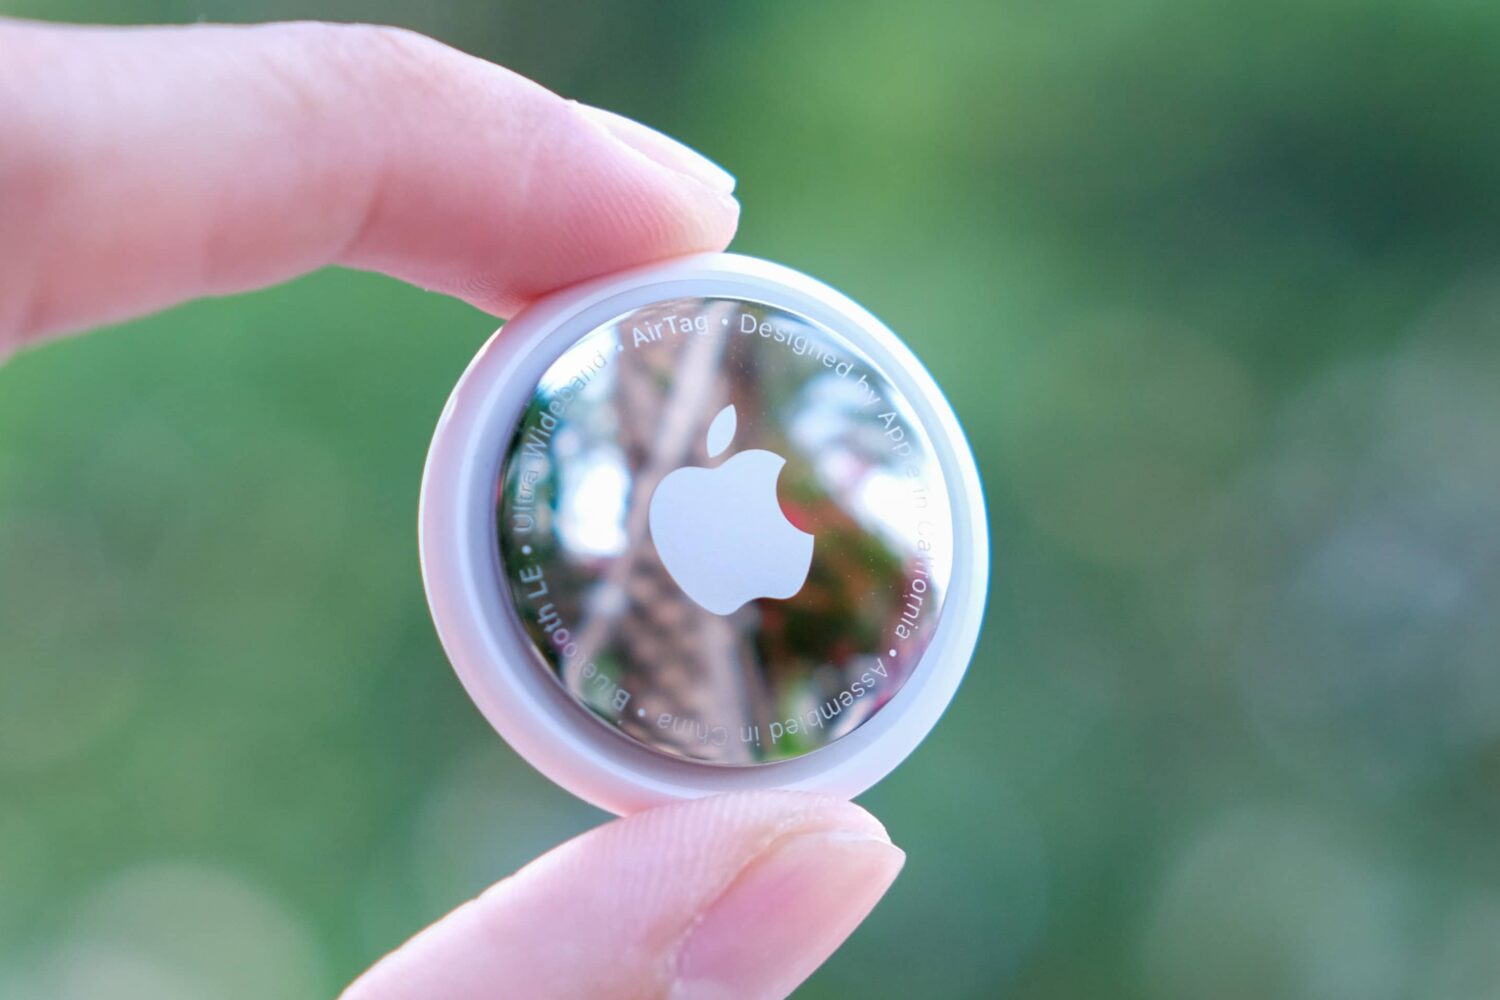 A closeup photograph of an Apple AirTag being held between a person's thumb and index finger, with the tracker's stainless steel back exposed to the camera